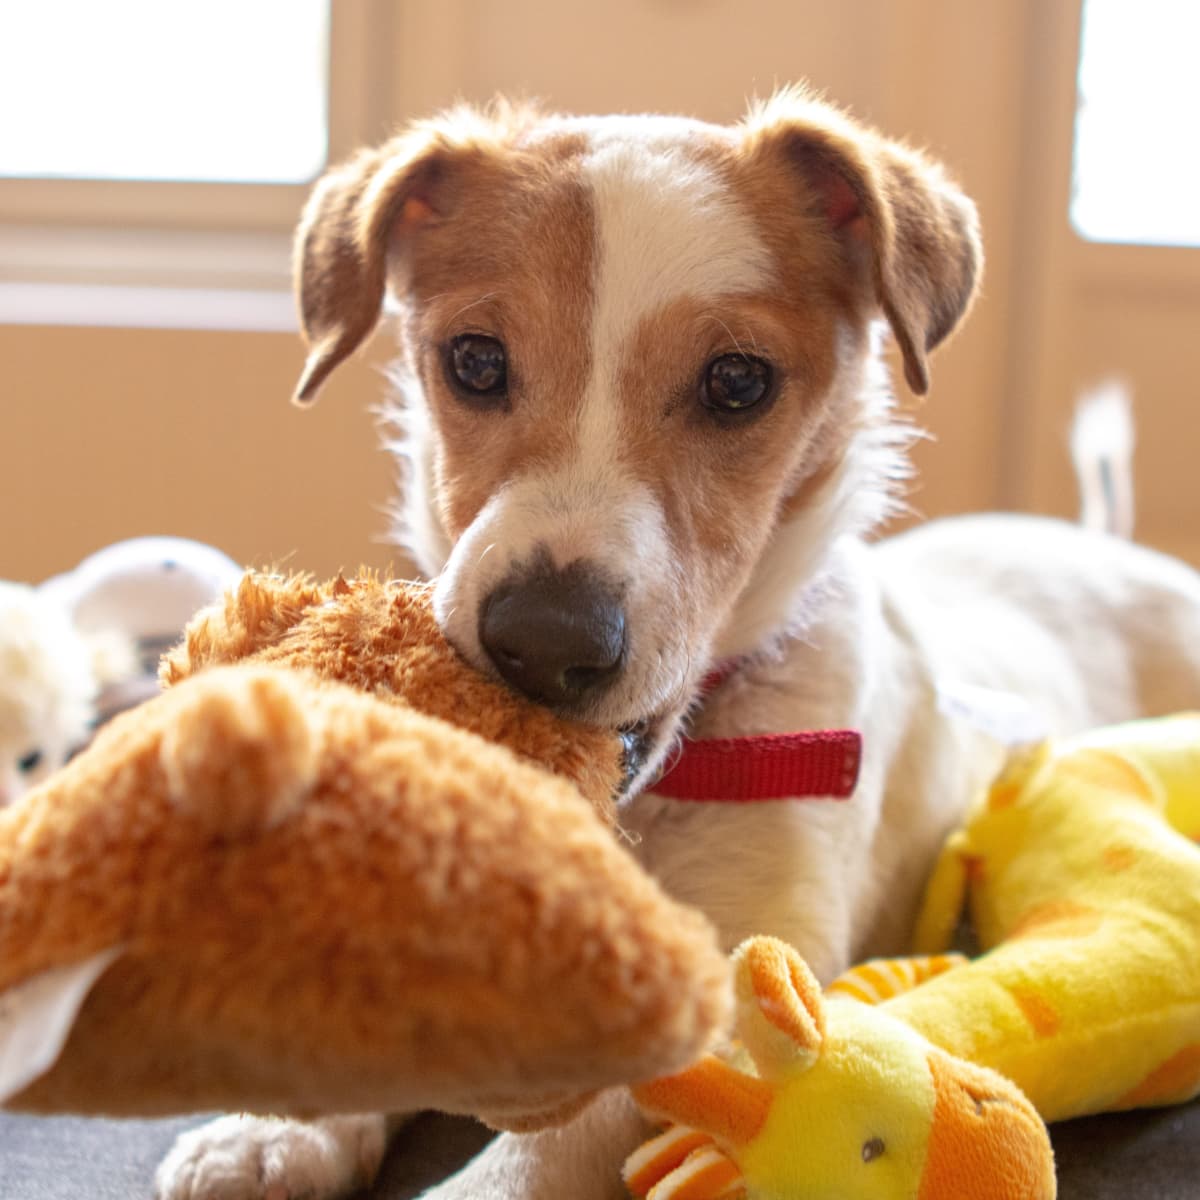 Do dogs get bored of their toys?